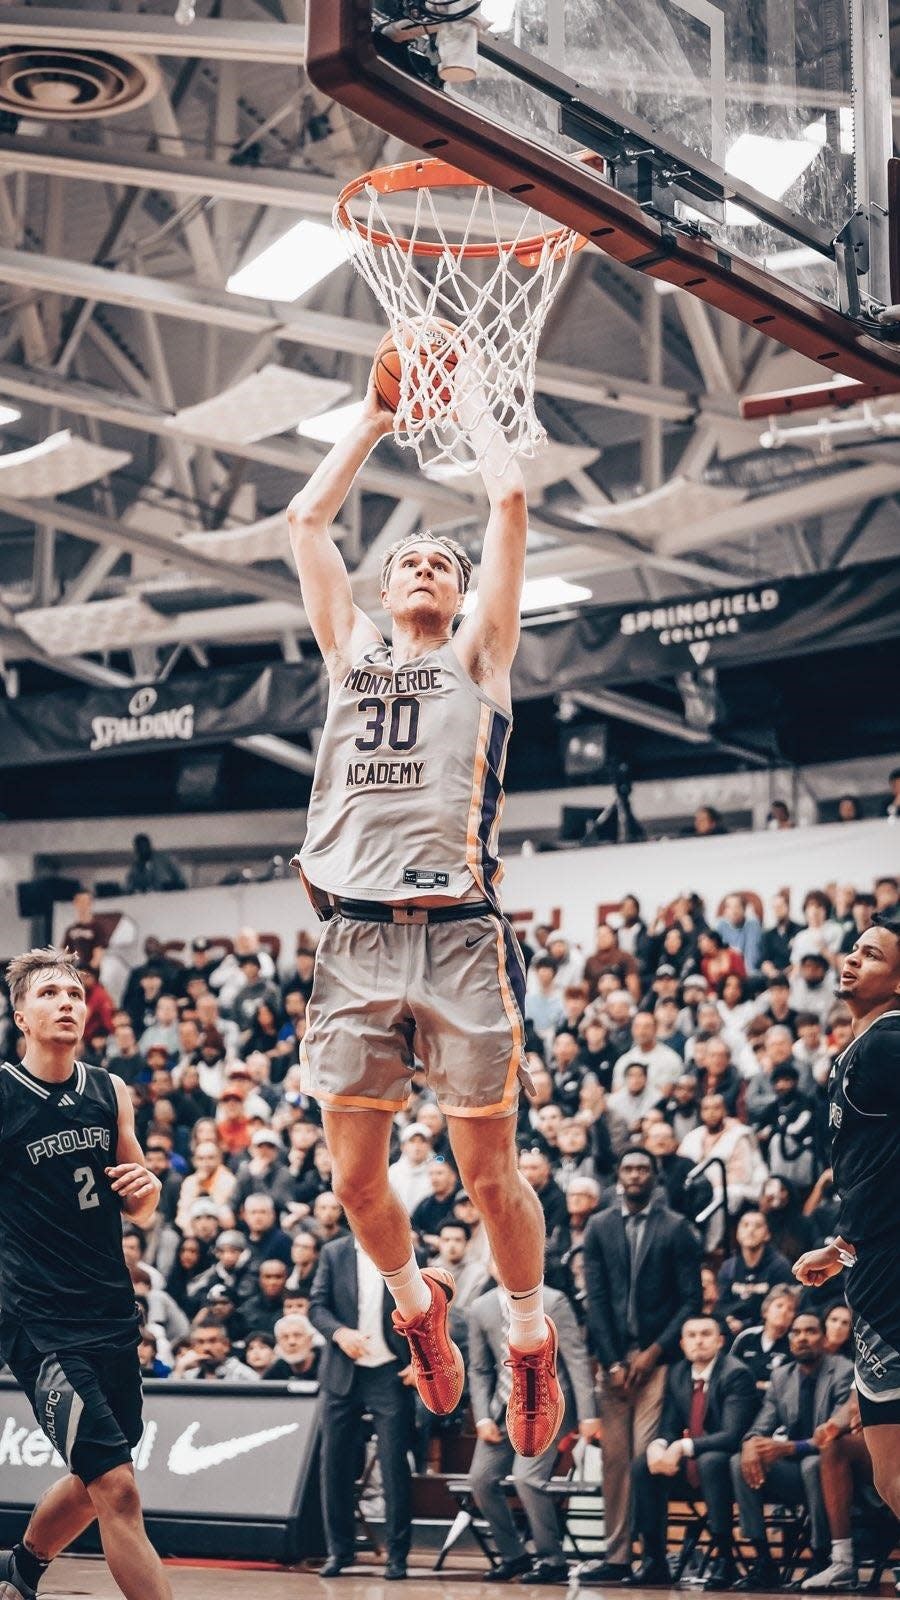 Indiana recruit Liam McNeeley of Montverde Academy will play in the Chipotle Nationals from April 4-6 at Brownsburg High School.